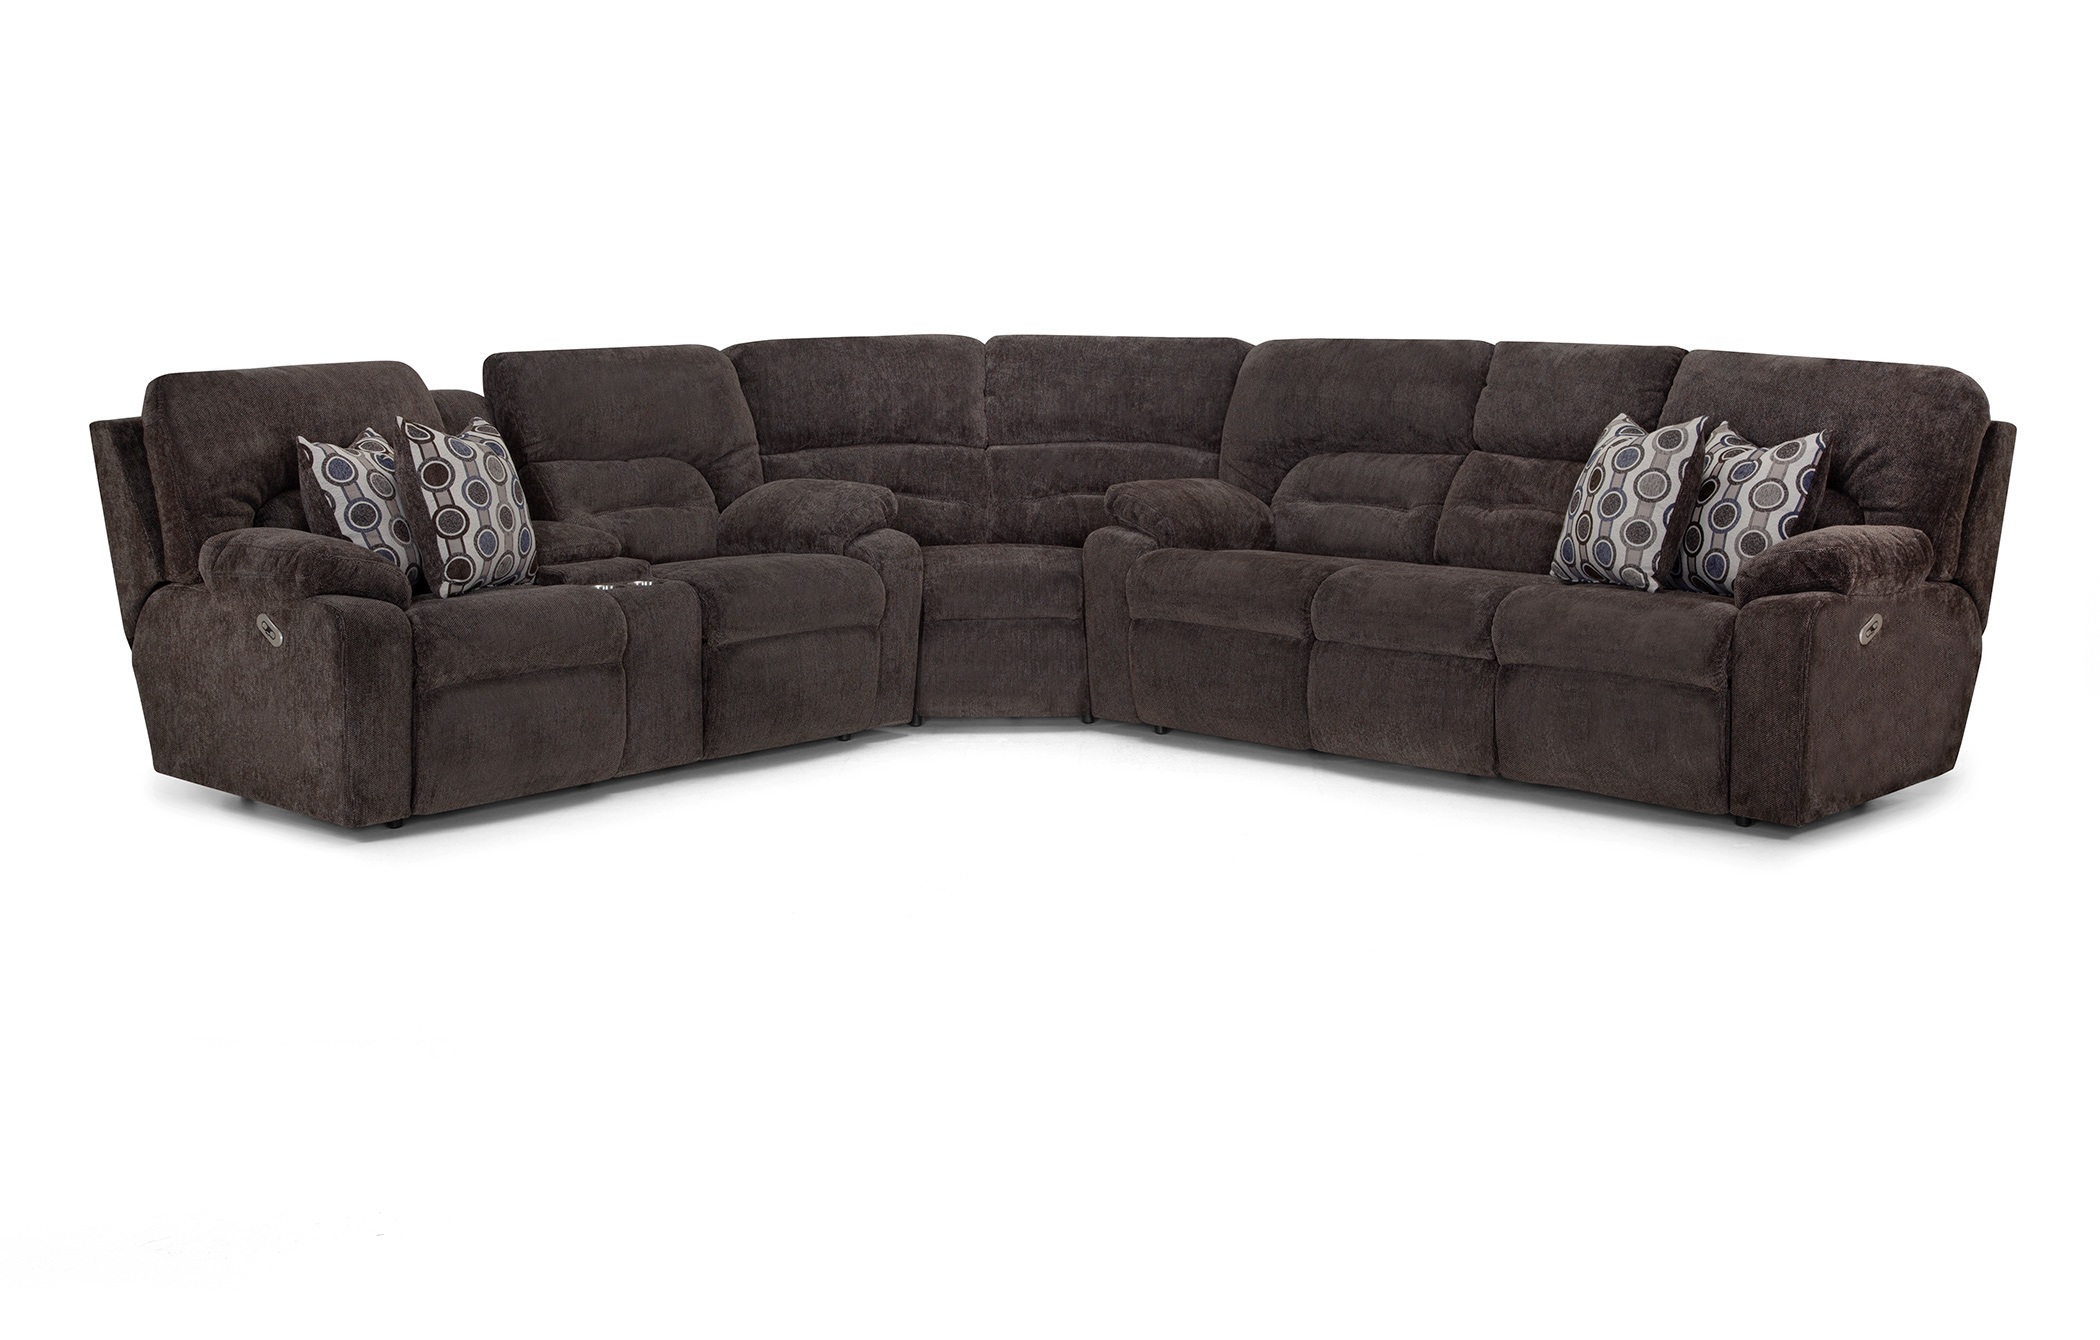  797 Tribute Sectional in 3740-15 